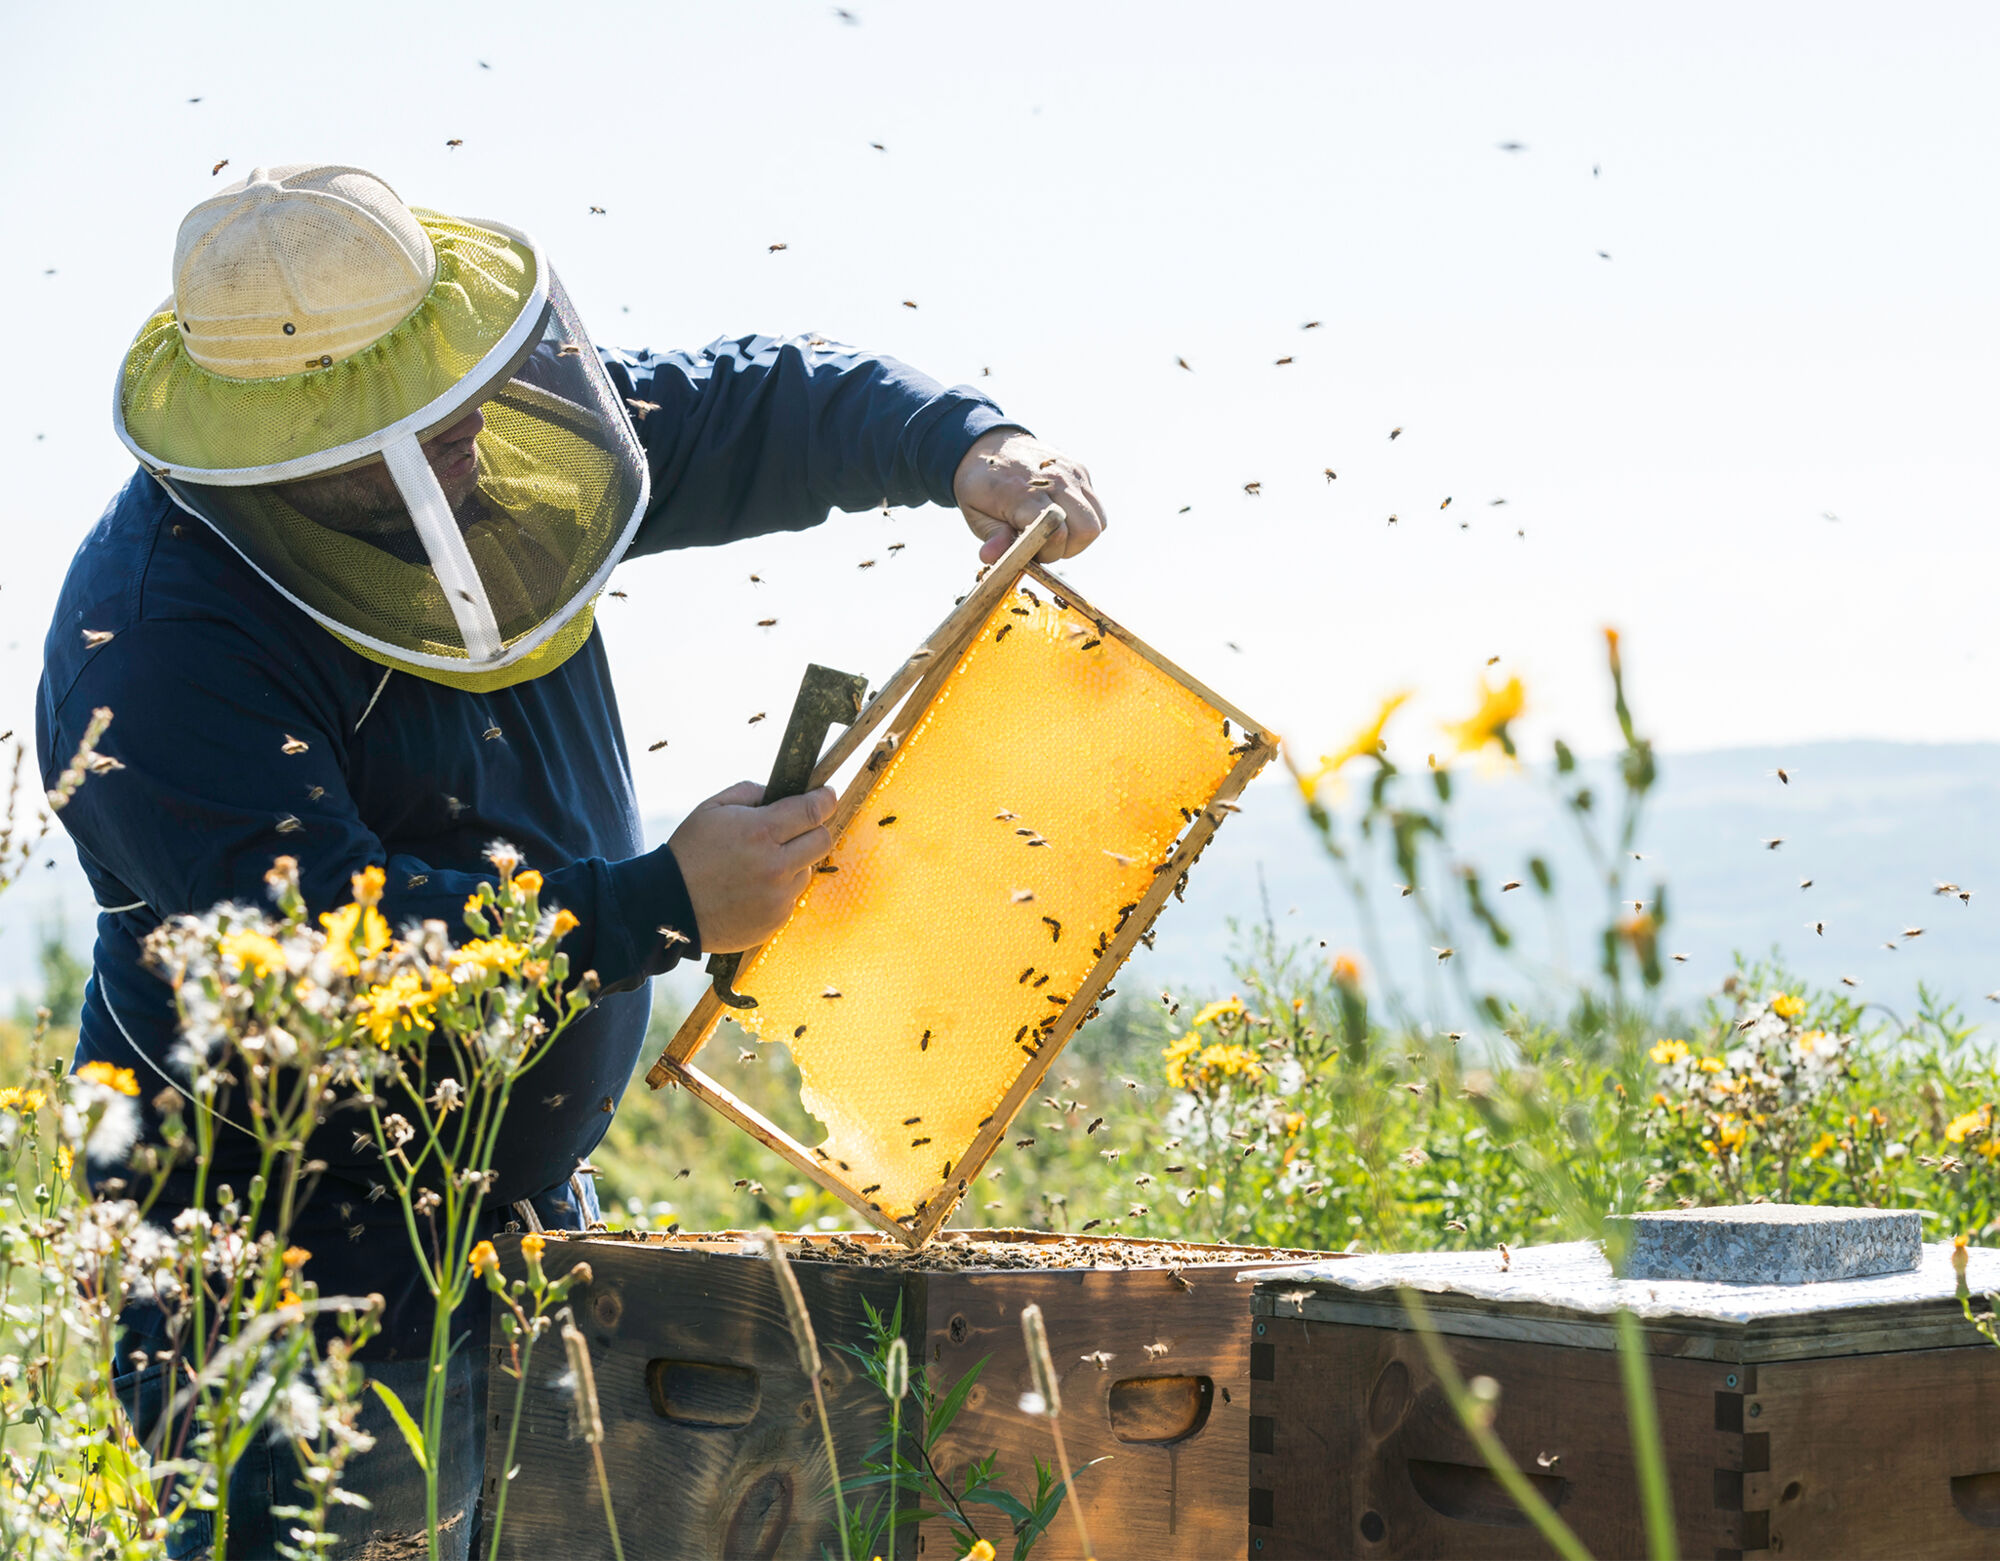 A beekeeper pulling out honeycombs from a bee hive, with bees flying around.